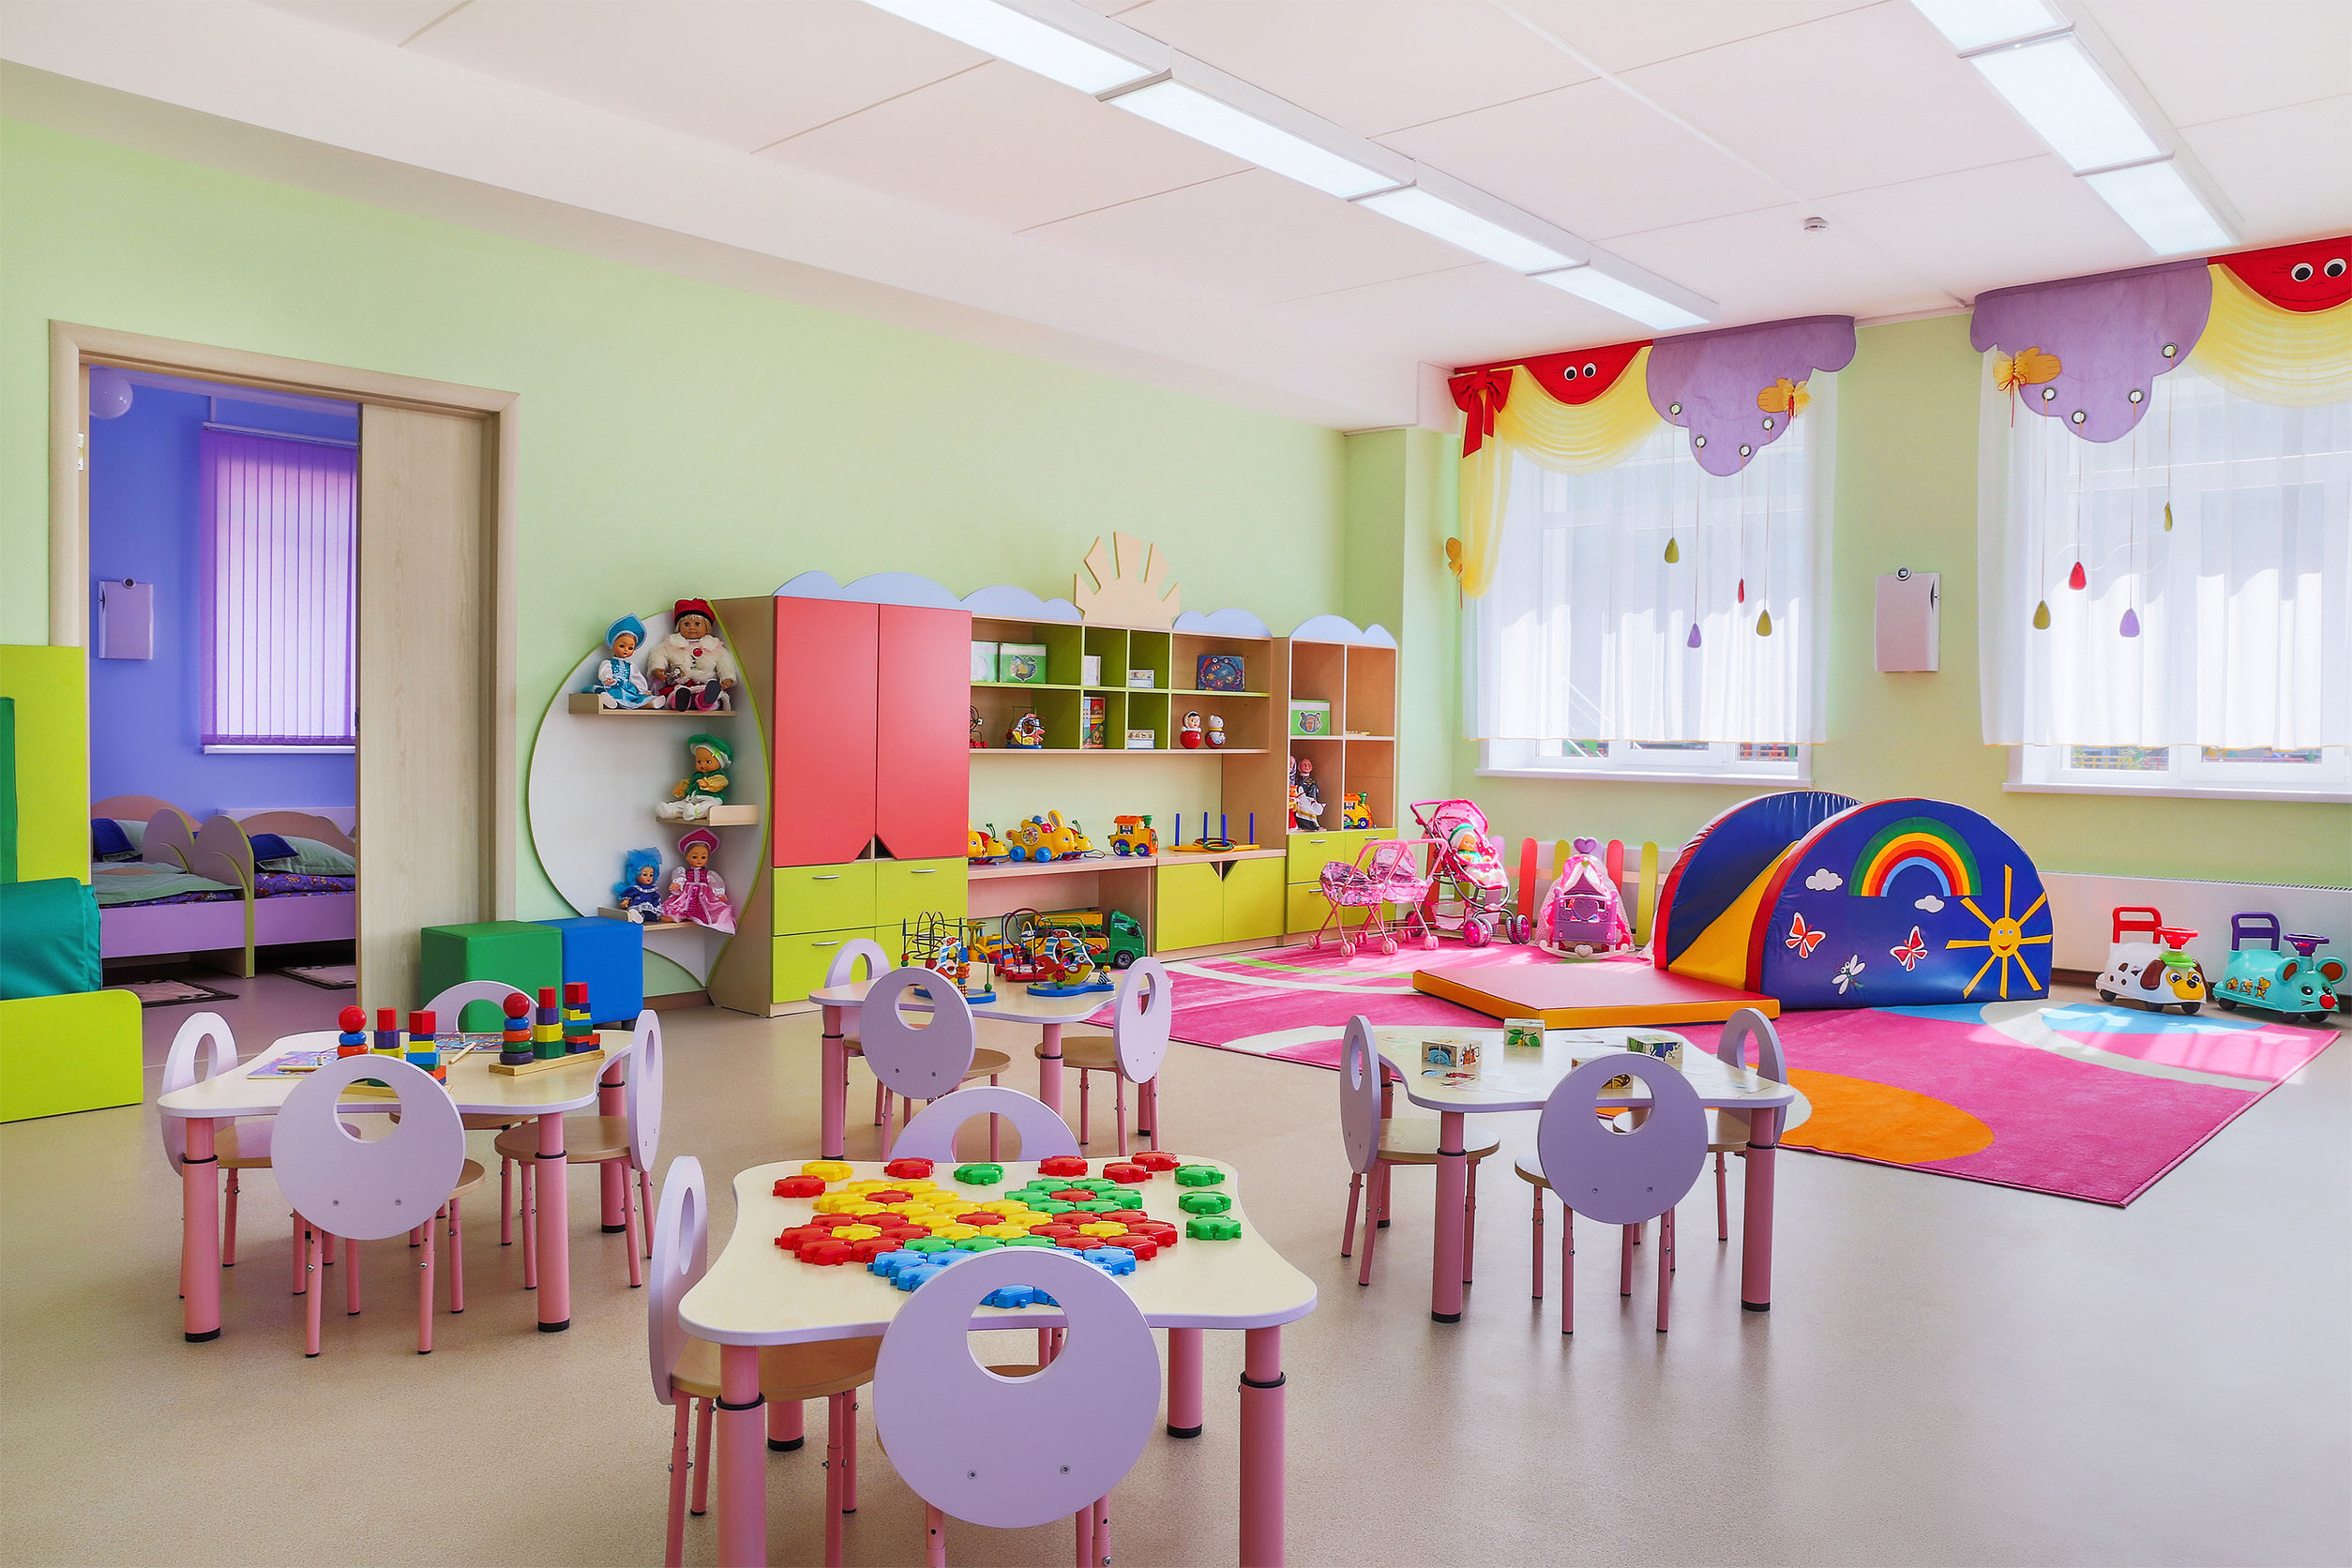 Flexible Classroom Design: Student-Centered Learning Environments